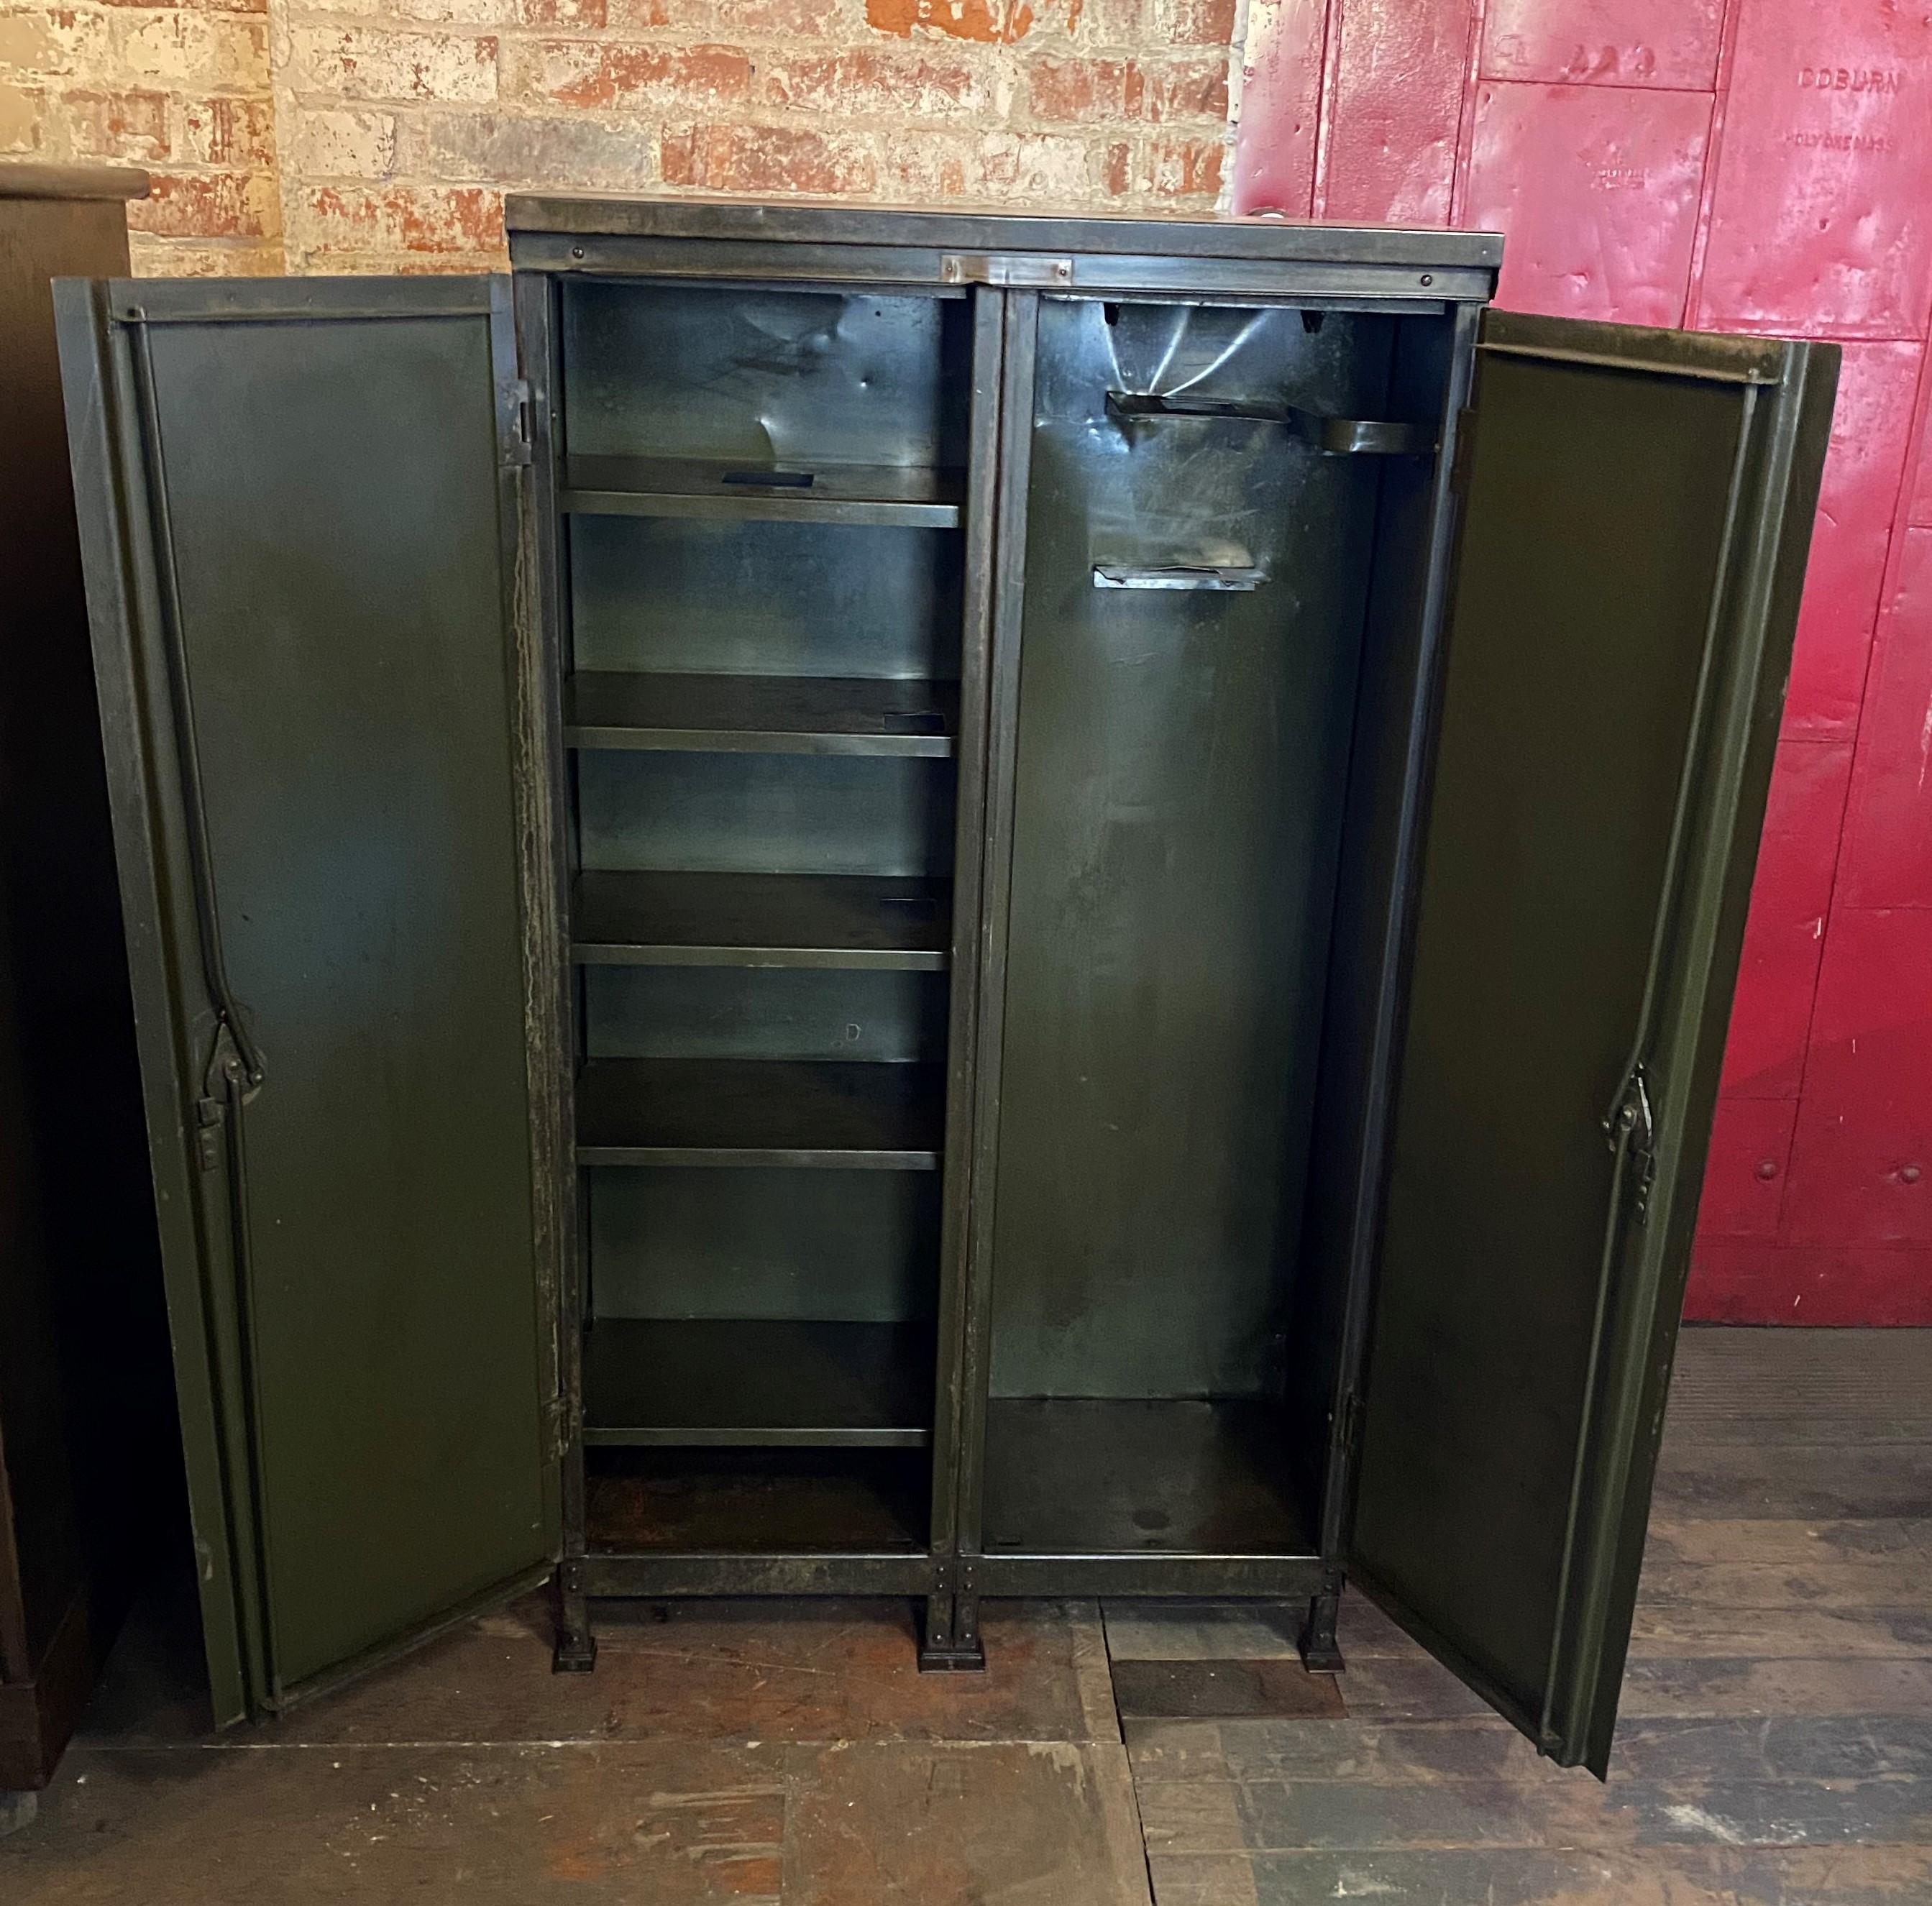 Vintage military locker
Overall dimensions: 30